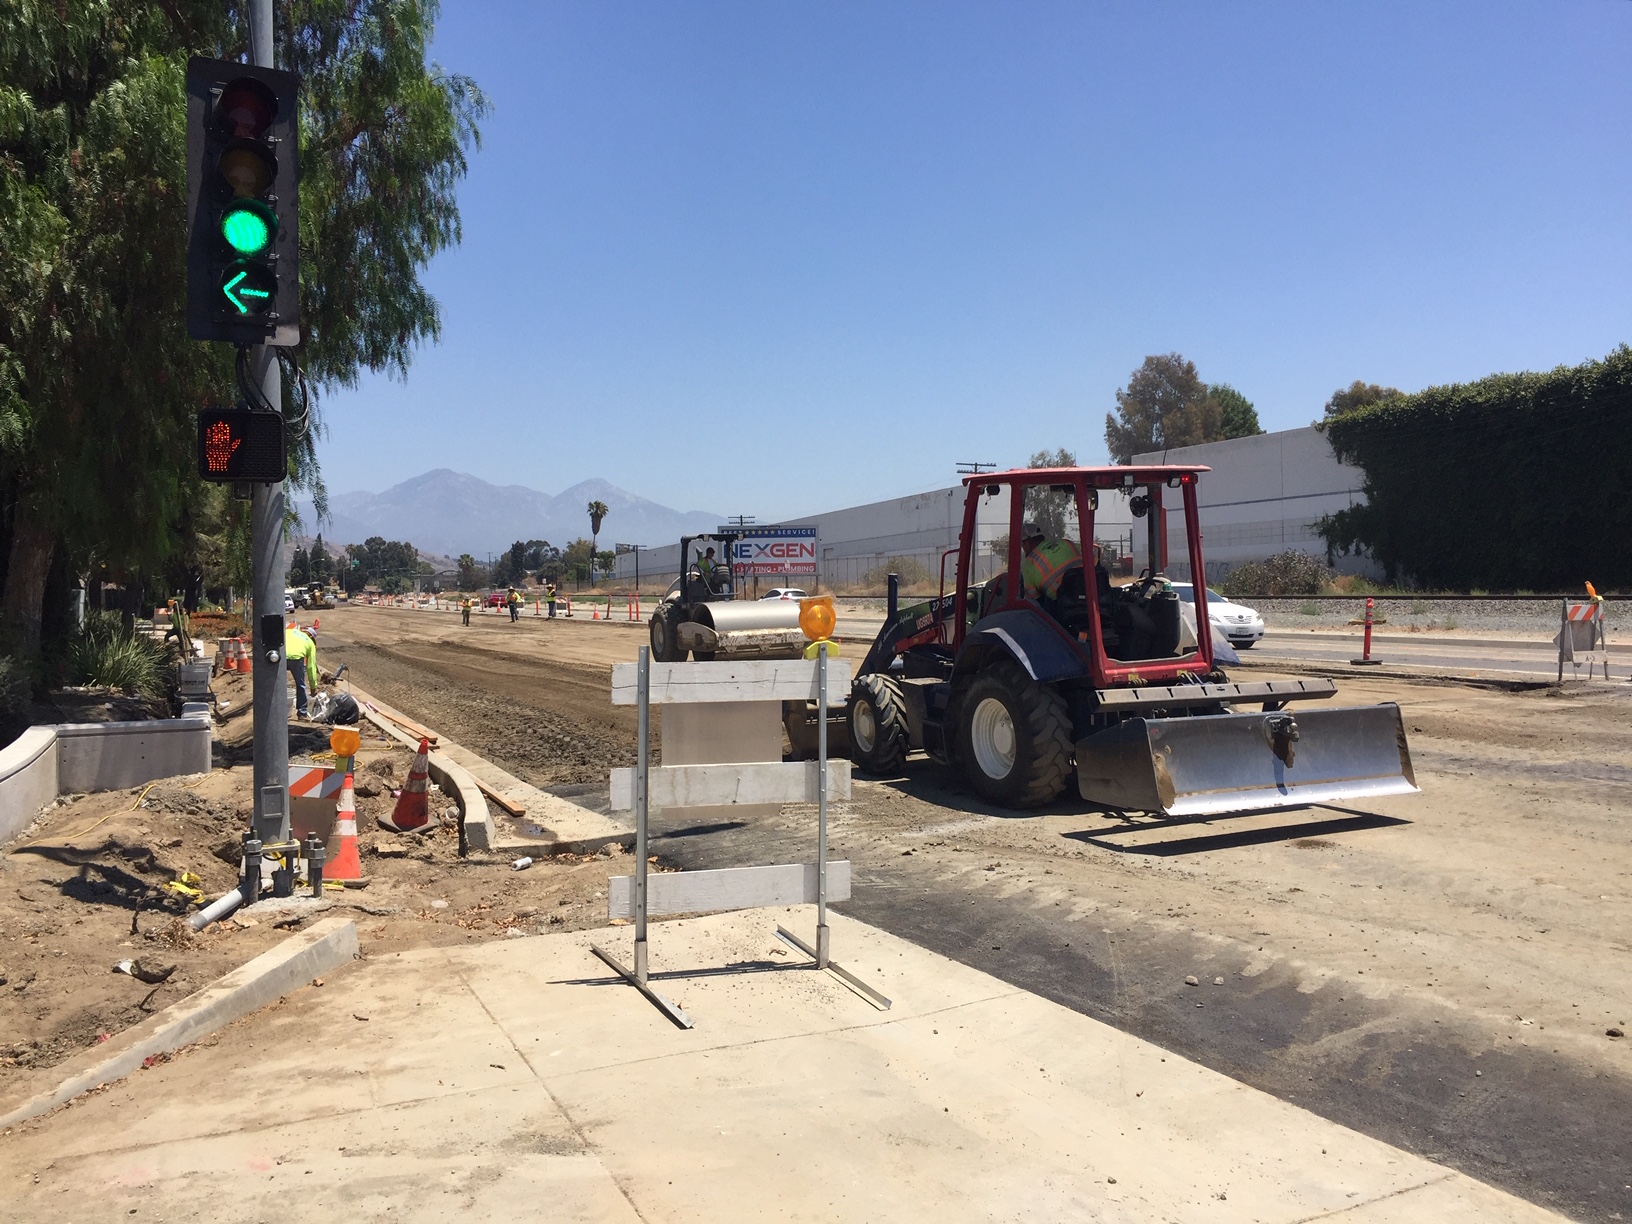 Construction on Valley Boulevard will eventually include a completed protected bike lane, yet no sign of the infrastructure is seen. Joe Linton/Streetsblog LA